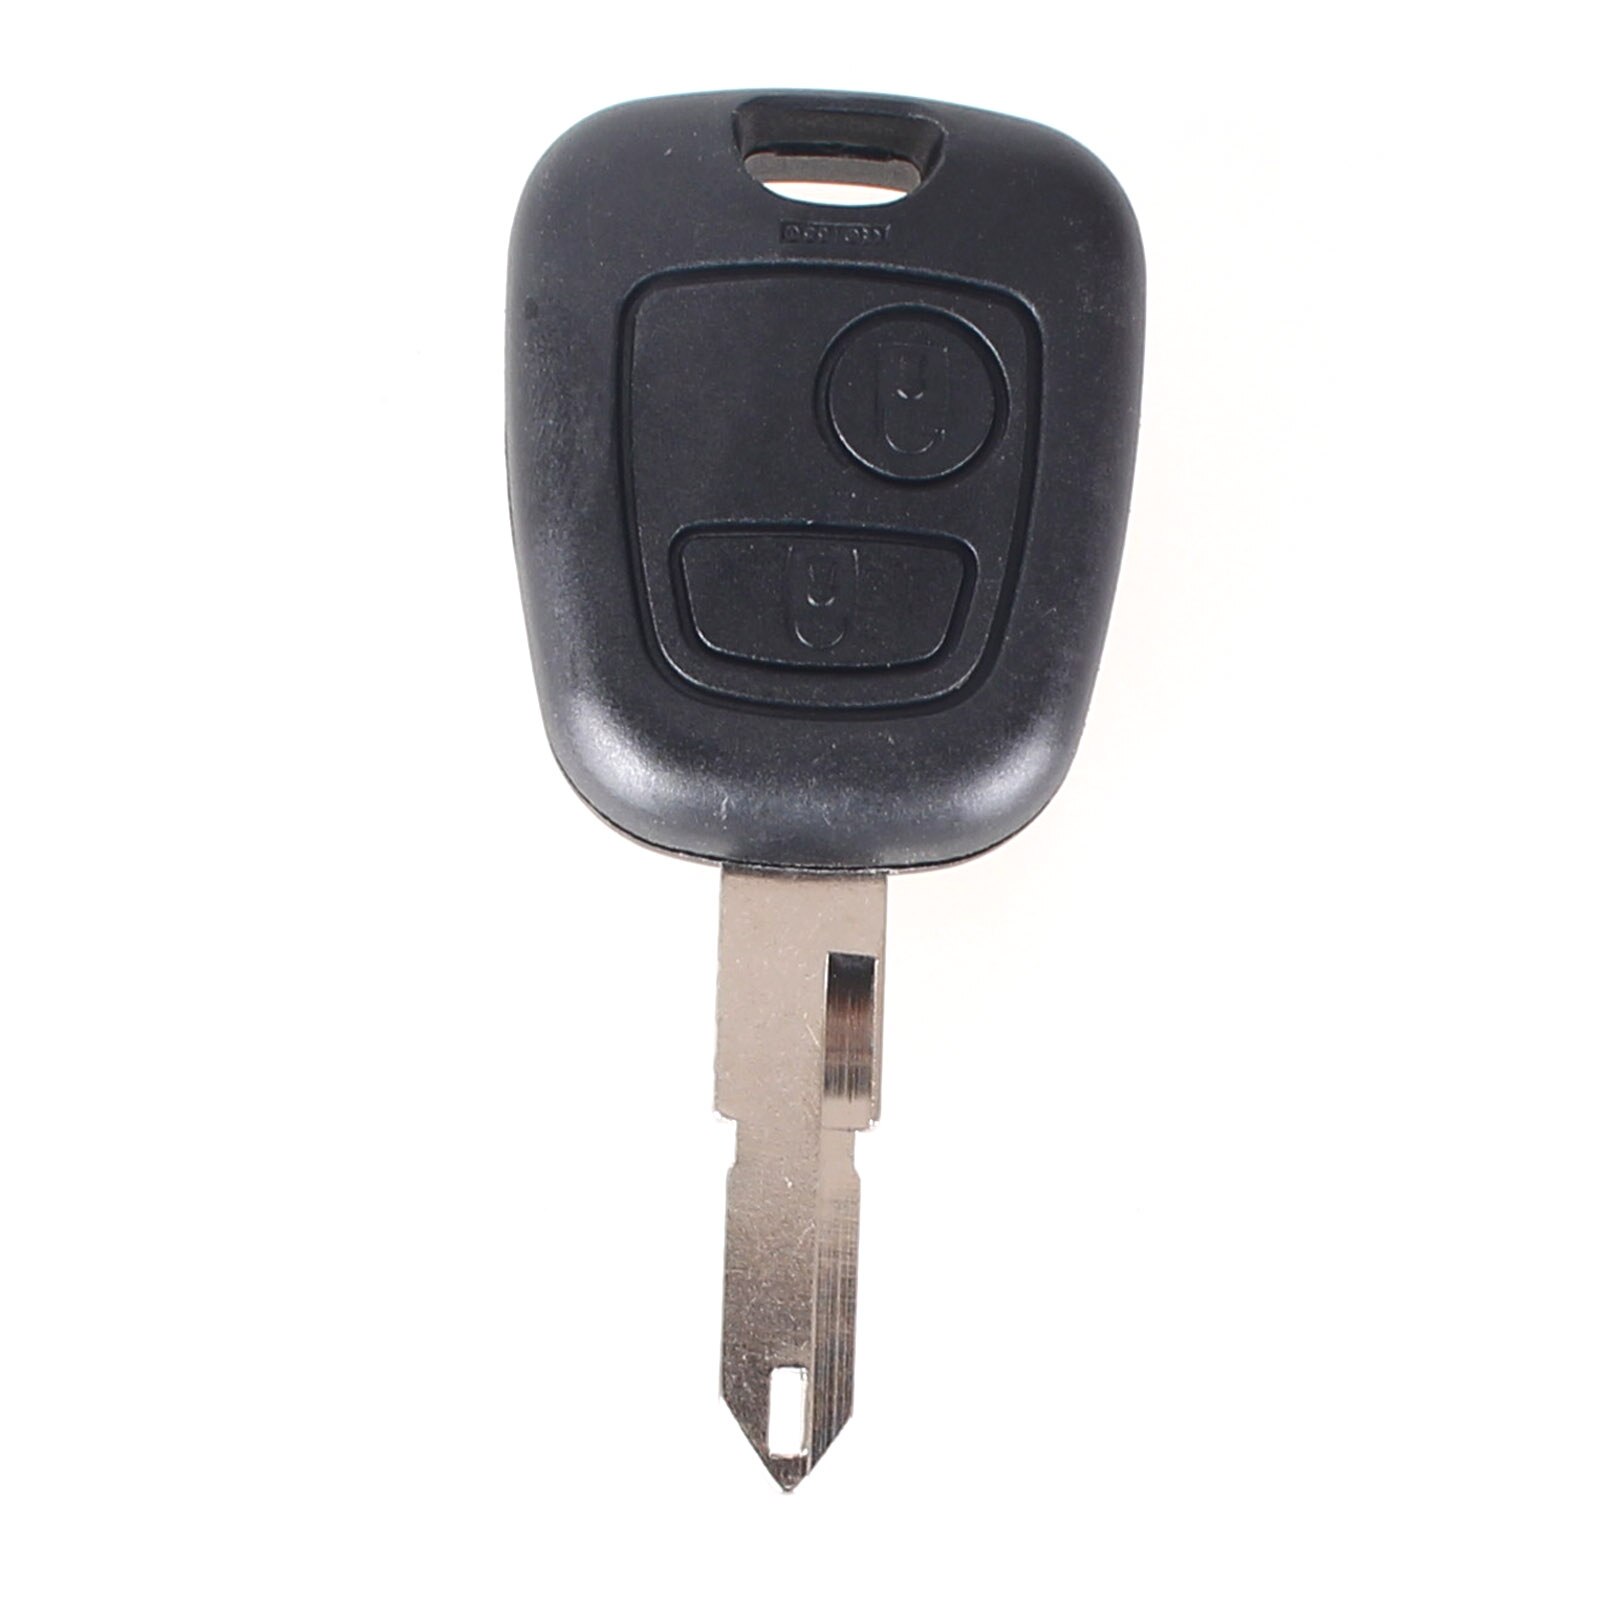 2 Buttons PCF7961 Transponder Chip Remote Control Car Key For Peugeot 206 306 405 433MHz Key With PCB Battery NE73 Blade